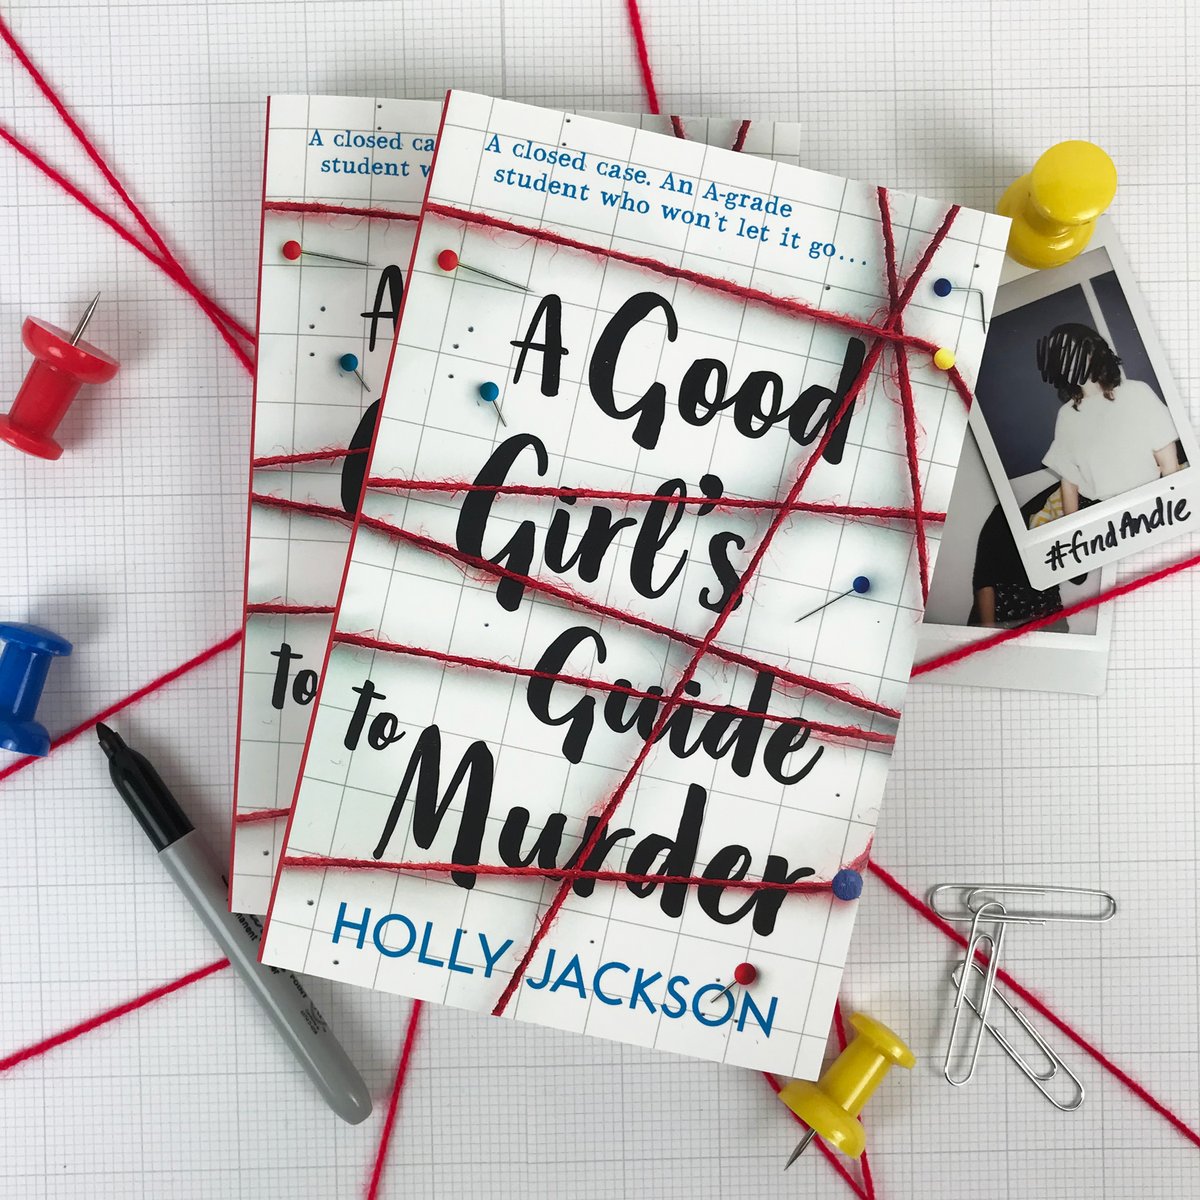 Holy Pepperoni! A Good Girl's Guide to Murder by the queen of YA crime has been out for 5 years🤯 That's 5 years of twists and turns, of secrets, and of course, of Pip and Ravi🥺 And we couldn't celebrate without the readers, so an extra special shout out to all of you🥳